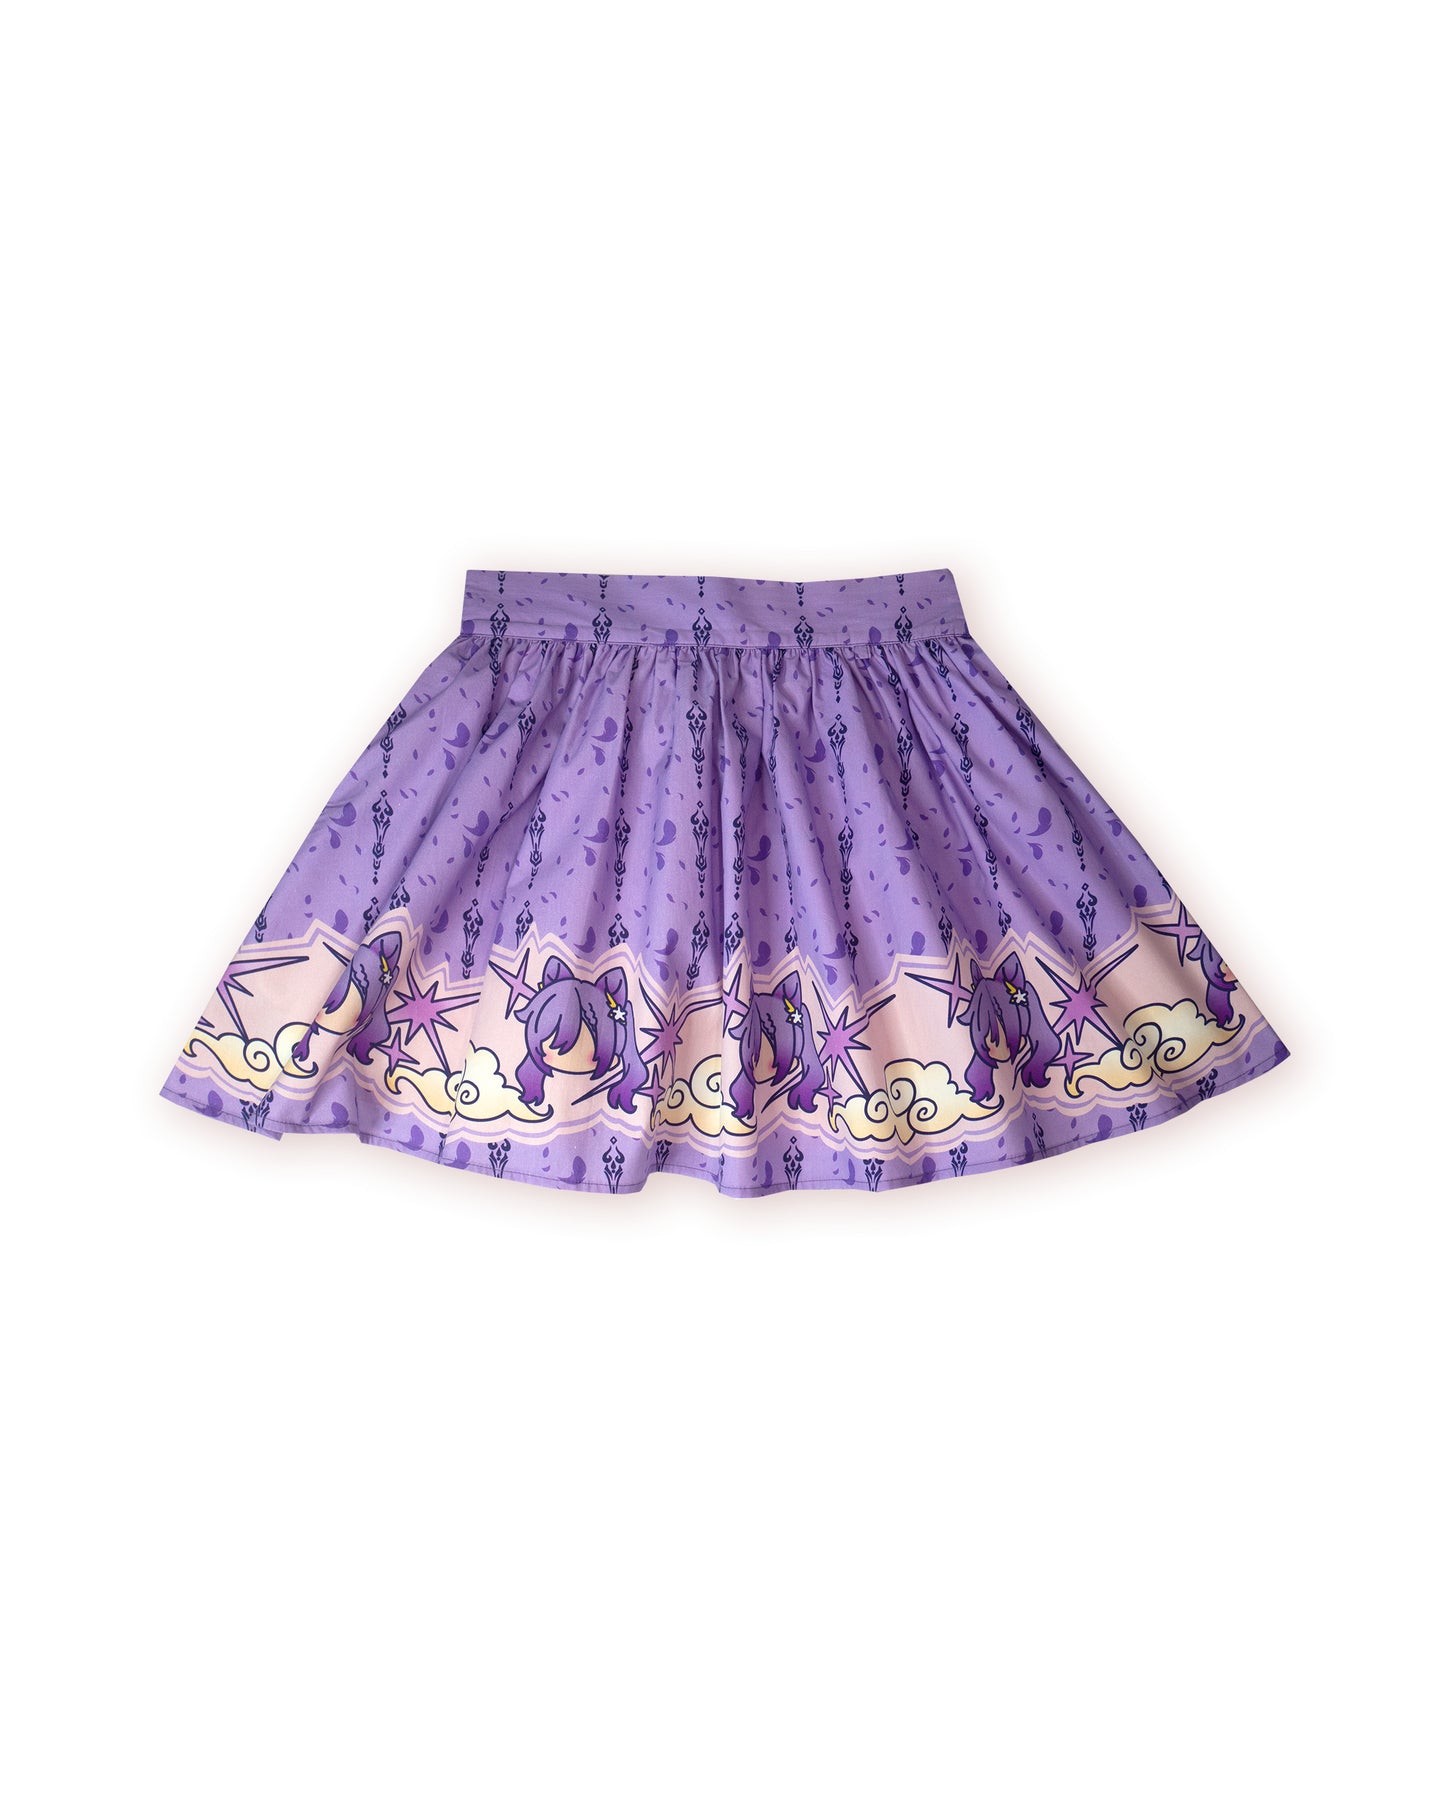 Made to order: Keqing Skirt